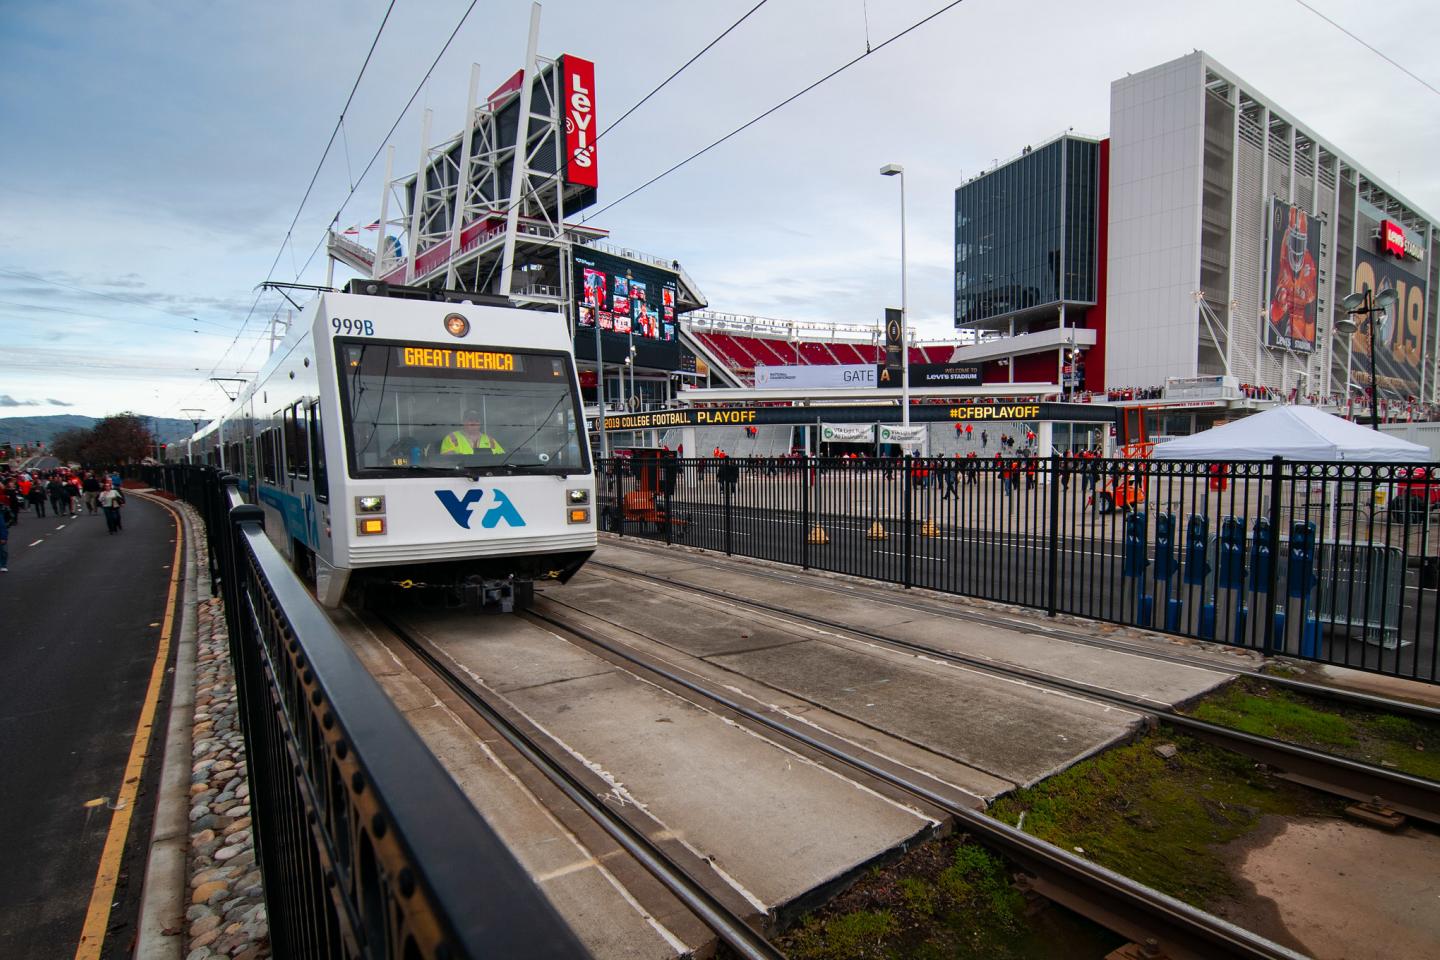 Light Rail In front of Levis